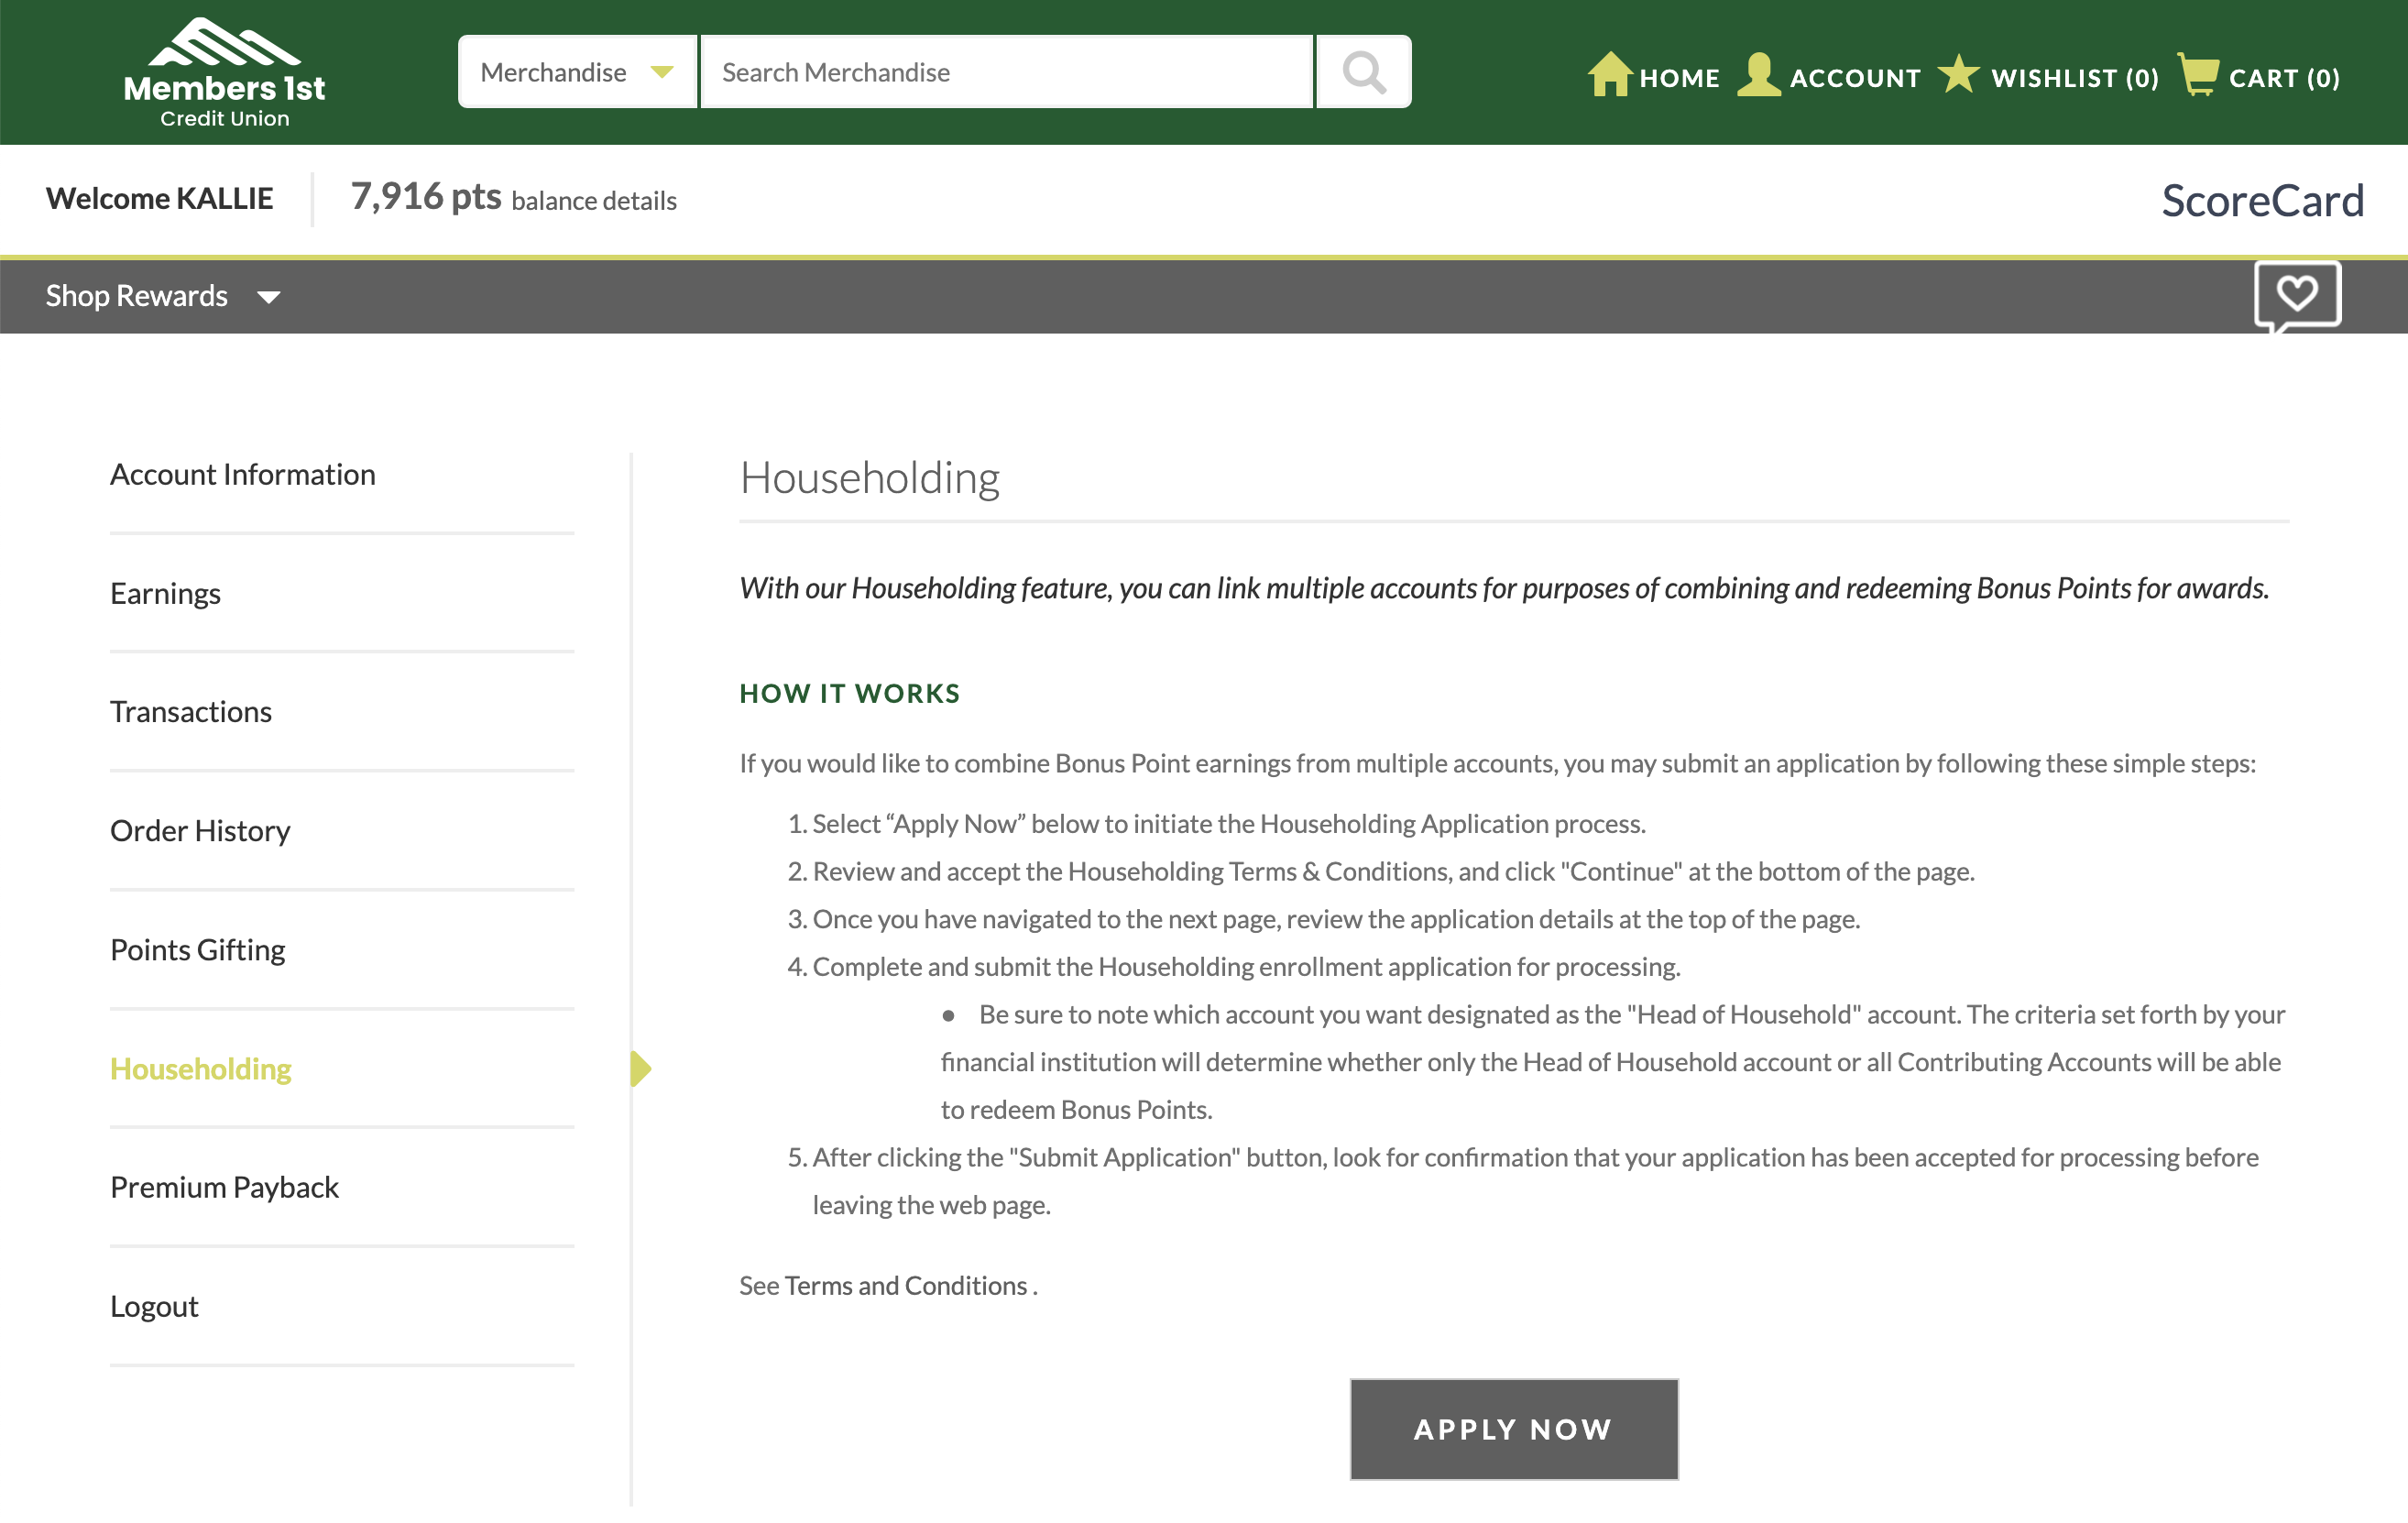 Householding page